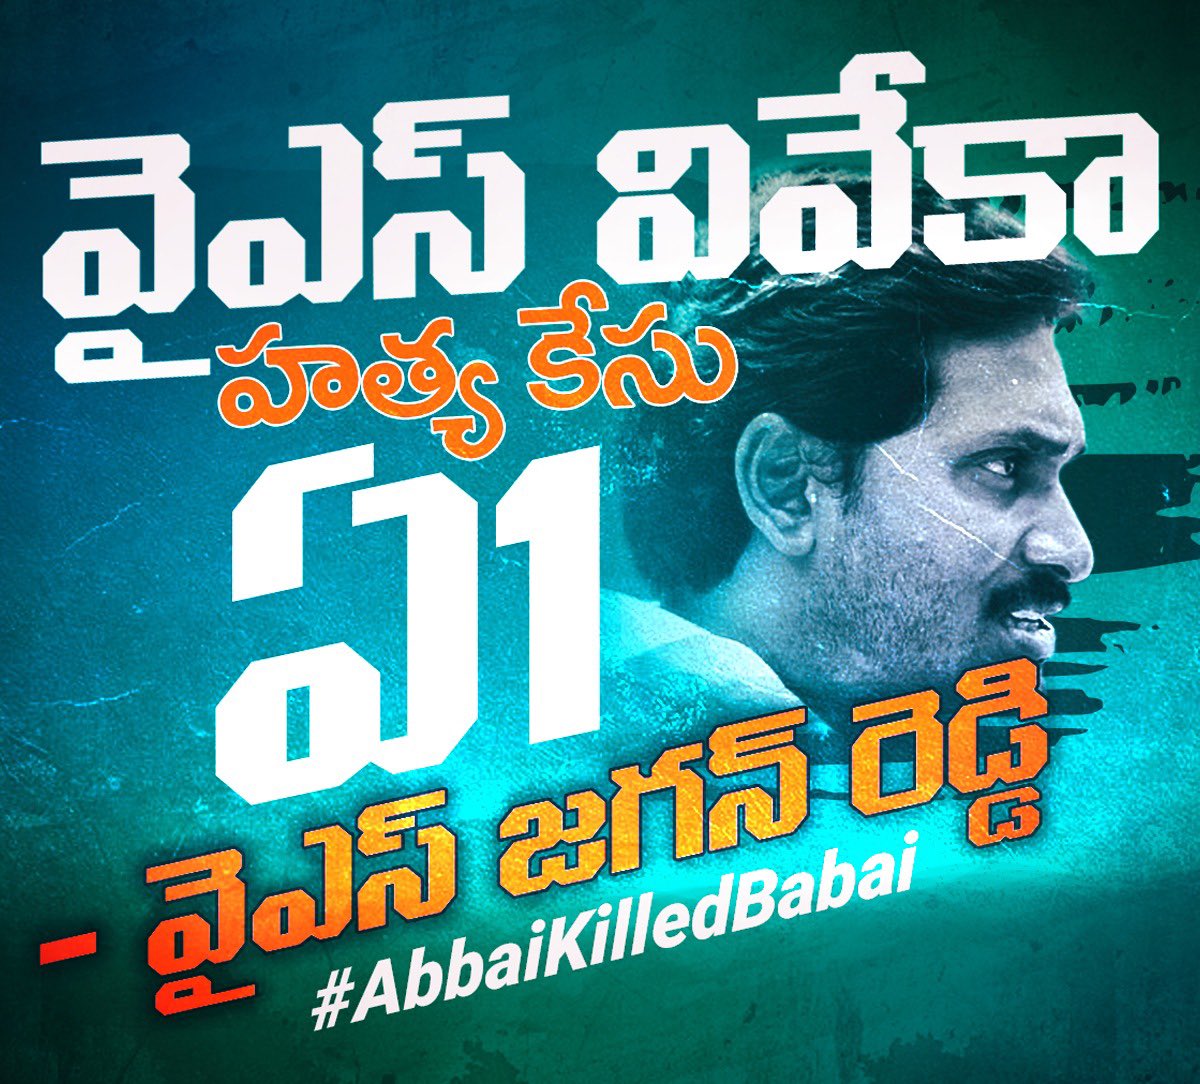 #AbbaiKilledBabai Photo,#AbbaiKilledBabai Photo by iTDP Official,iTDP Official on twitter tweets #AbbaiKilledBabai Photo